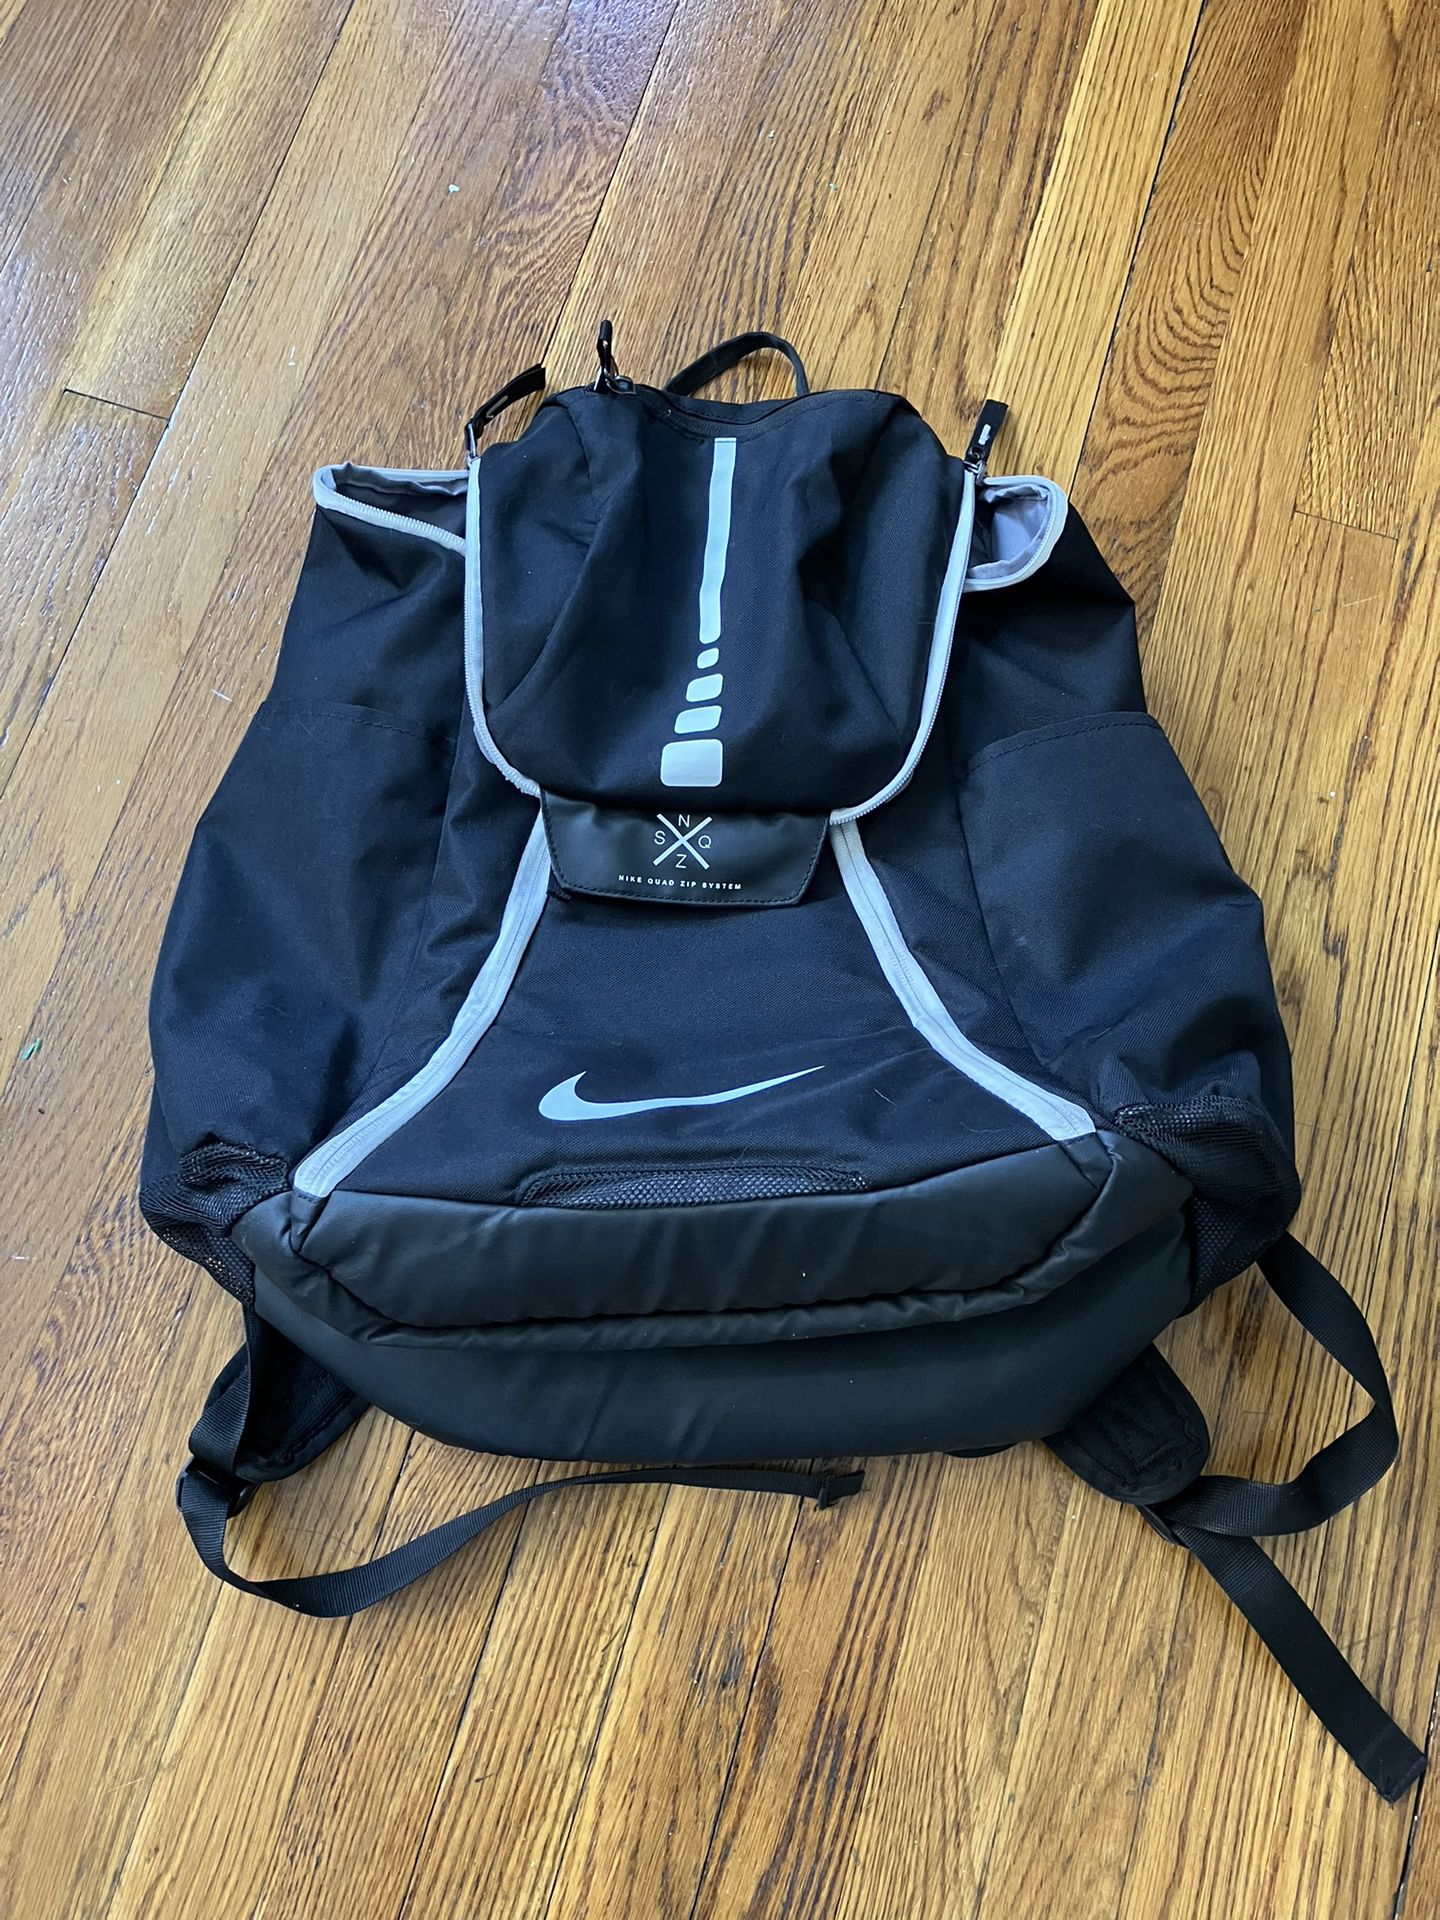 Nike Quad Zip System Backpack For Basketball Or Sport 